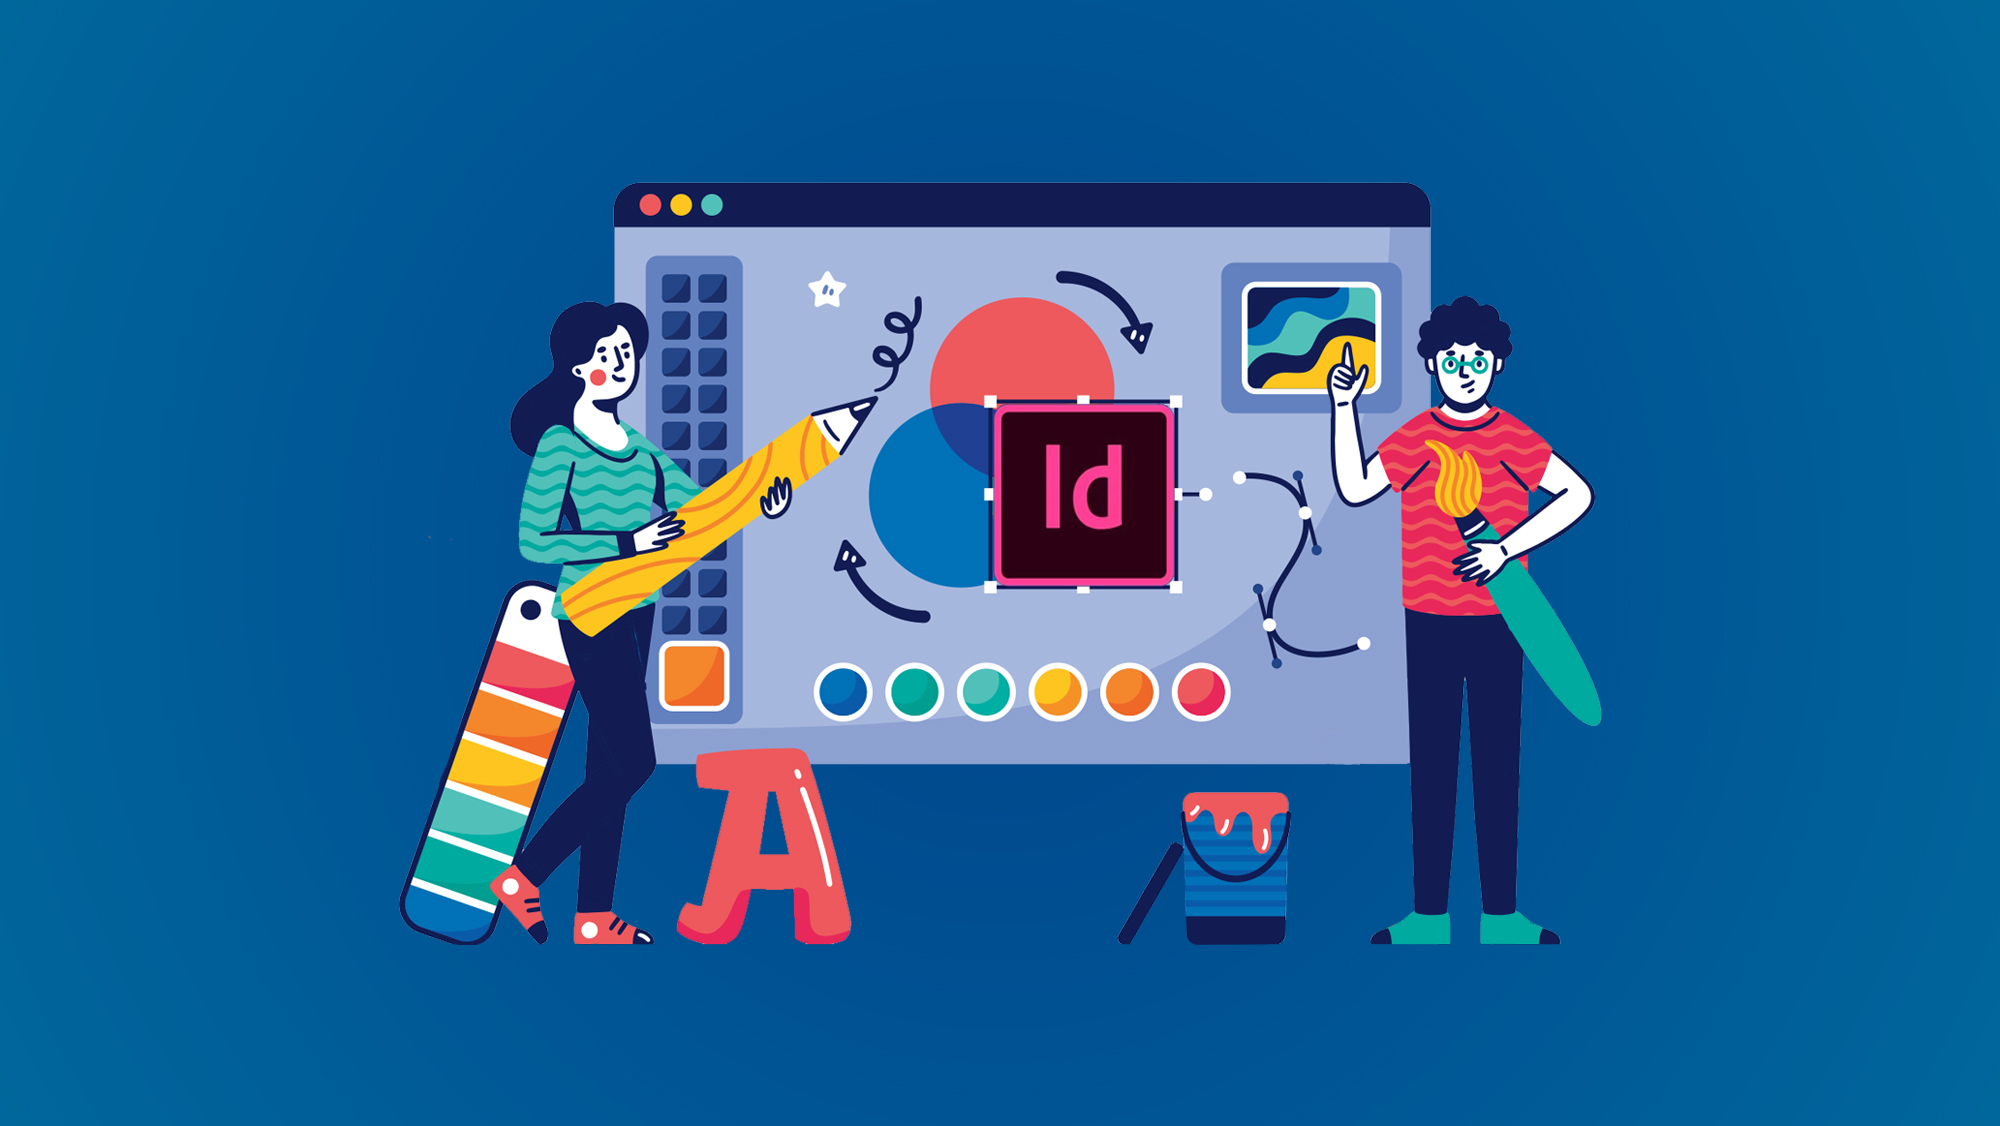 Mastering-Desig-Your-Guide-to-Adobe-InDesign-Training